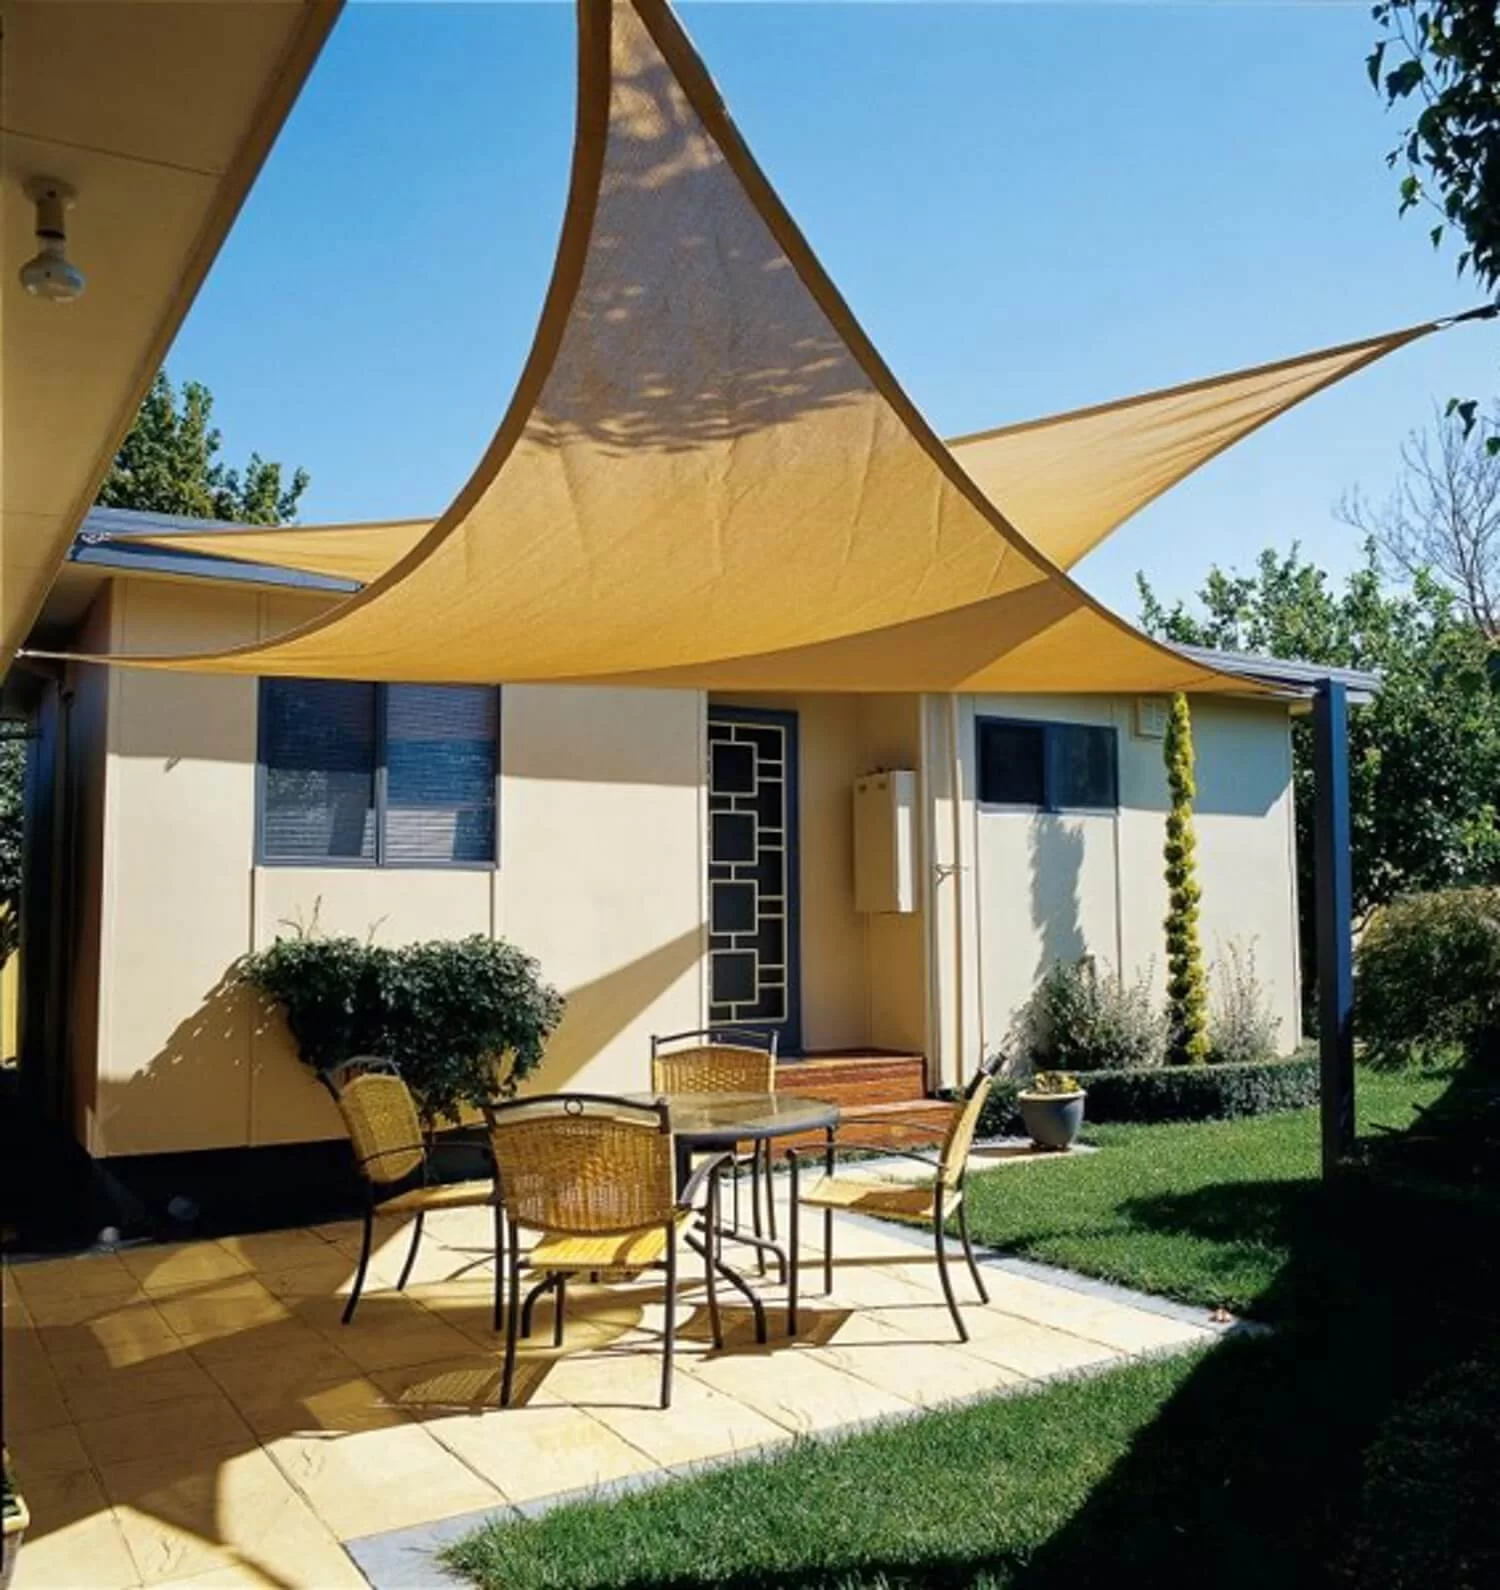 A Tent Awning with Milk Can Supports .jpg